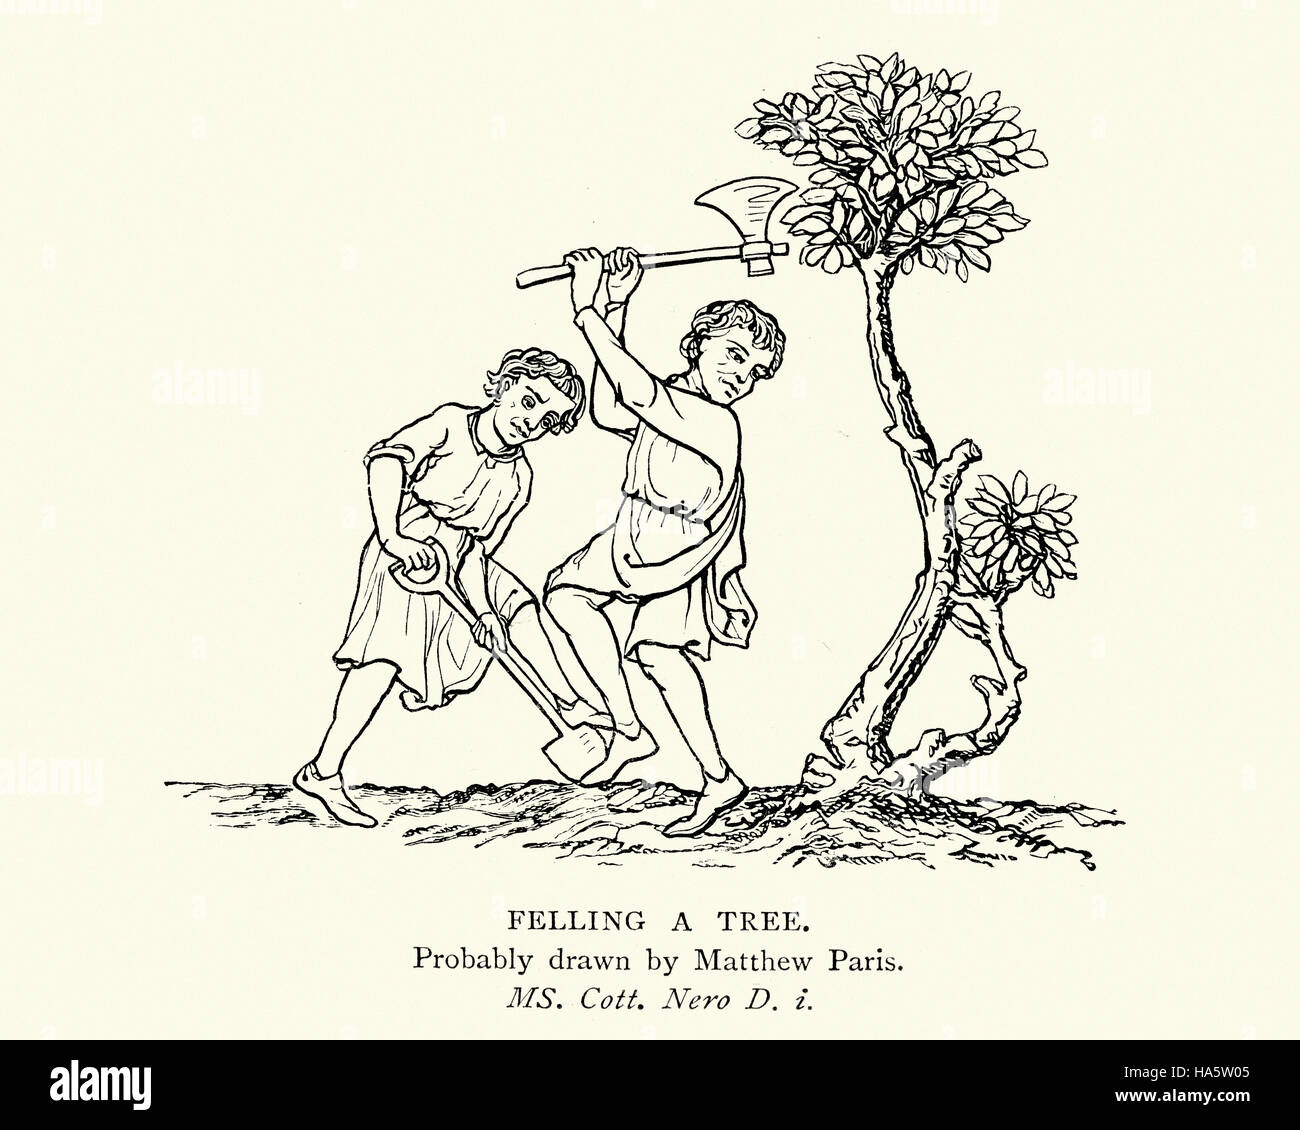 Medieval illustration of men felling a tree with an axe to clear a field for agriculture. Stock Photo